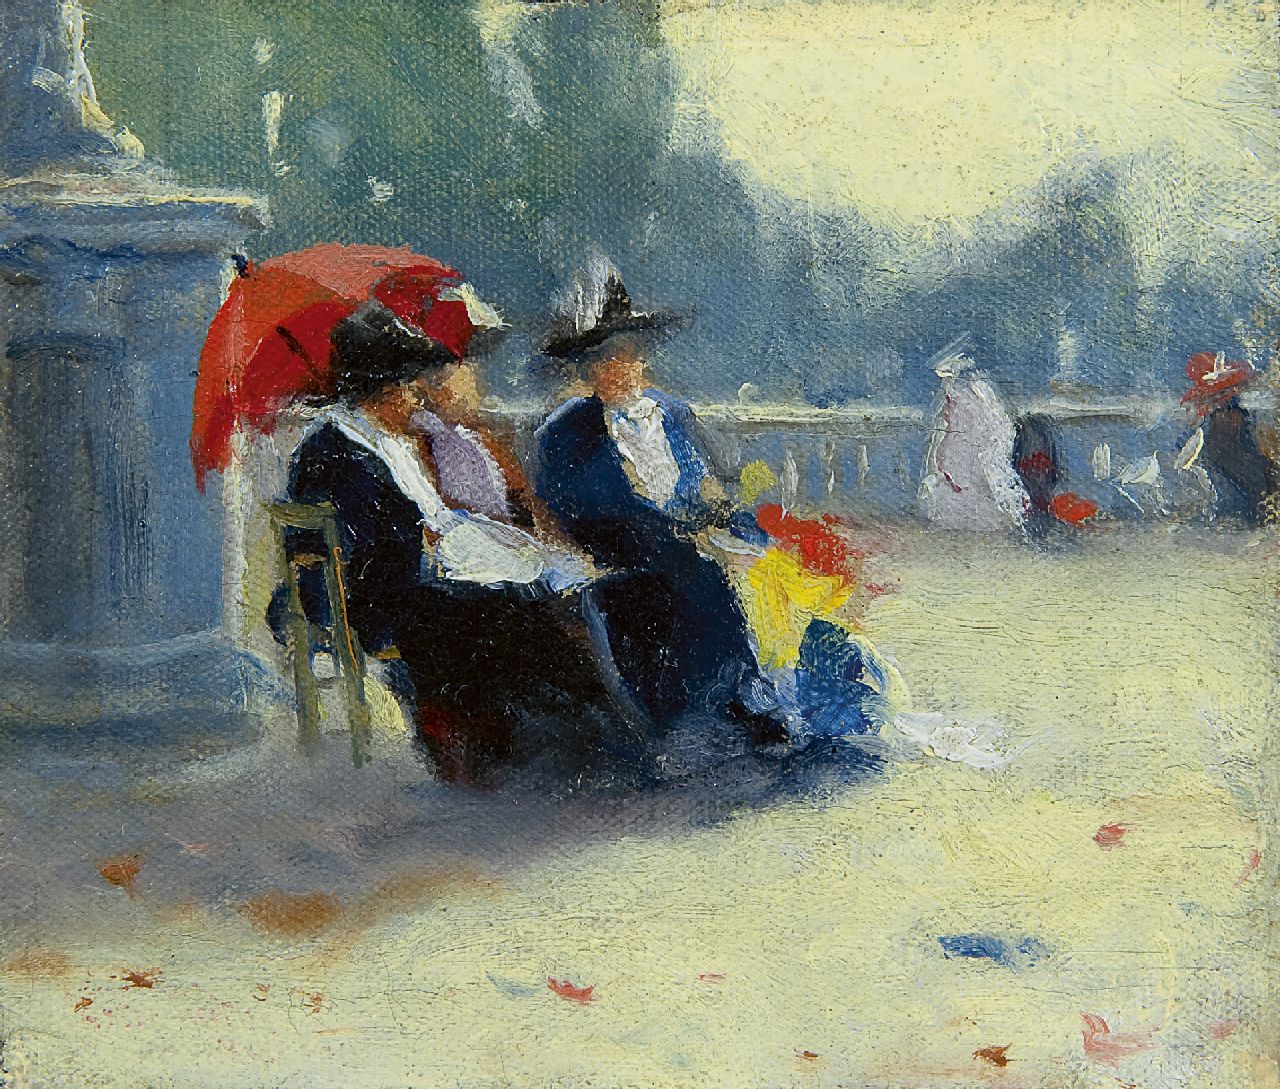 Castle Keith W.  | Walter Castle Keith, Friends in the Jardin du Luxembourg, Öl auf Leinwand auf Holz 9,8 x 11,4 cm, signed on the reverse und dated 1911 on the reverse